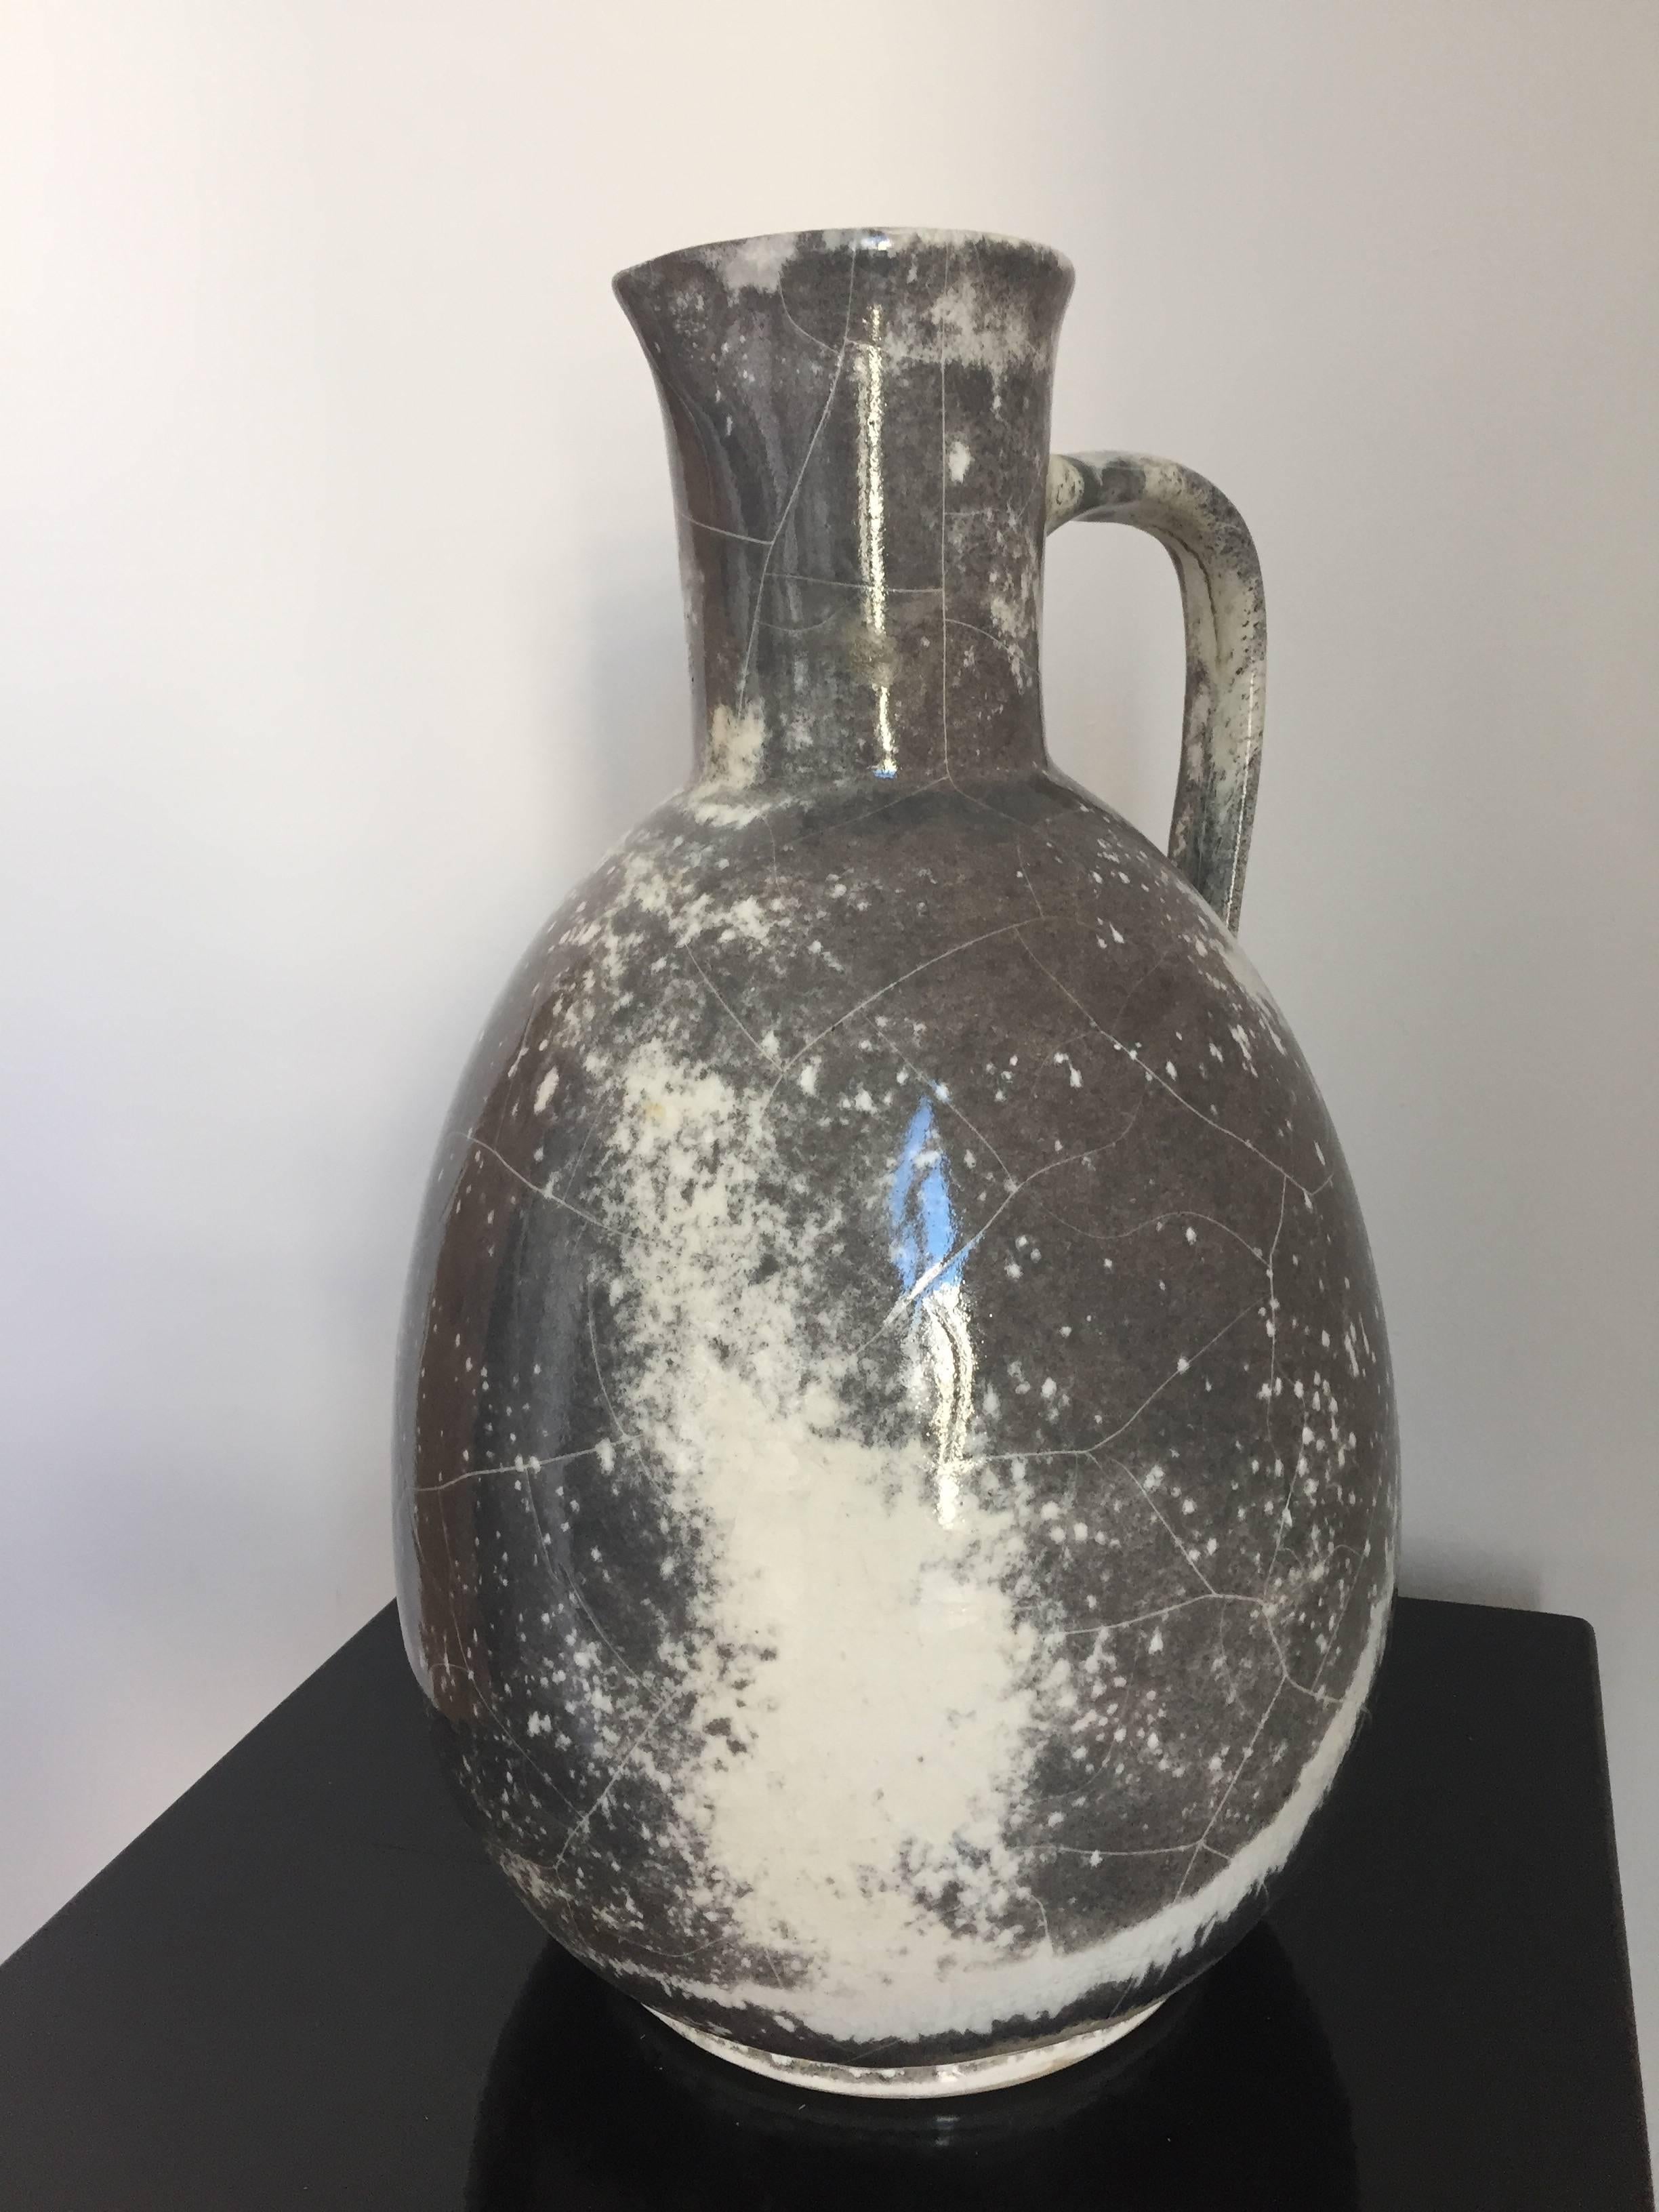 Rare ceramic jar by Richard Uhlemeyer, German ceramist,

Large vase, beautiful glaze in grey and off-white shades

Germany, 1940s, stamped at the bottom edge, perfect condition, size 42 cm high x 32 cm diameter.